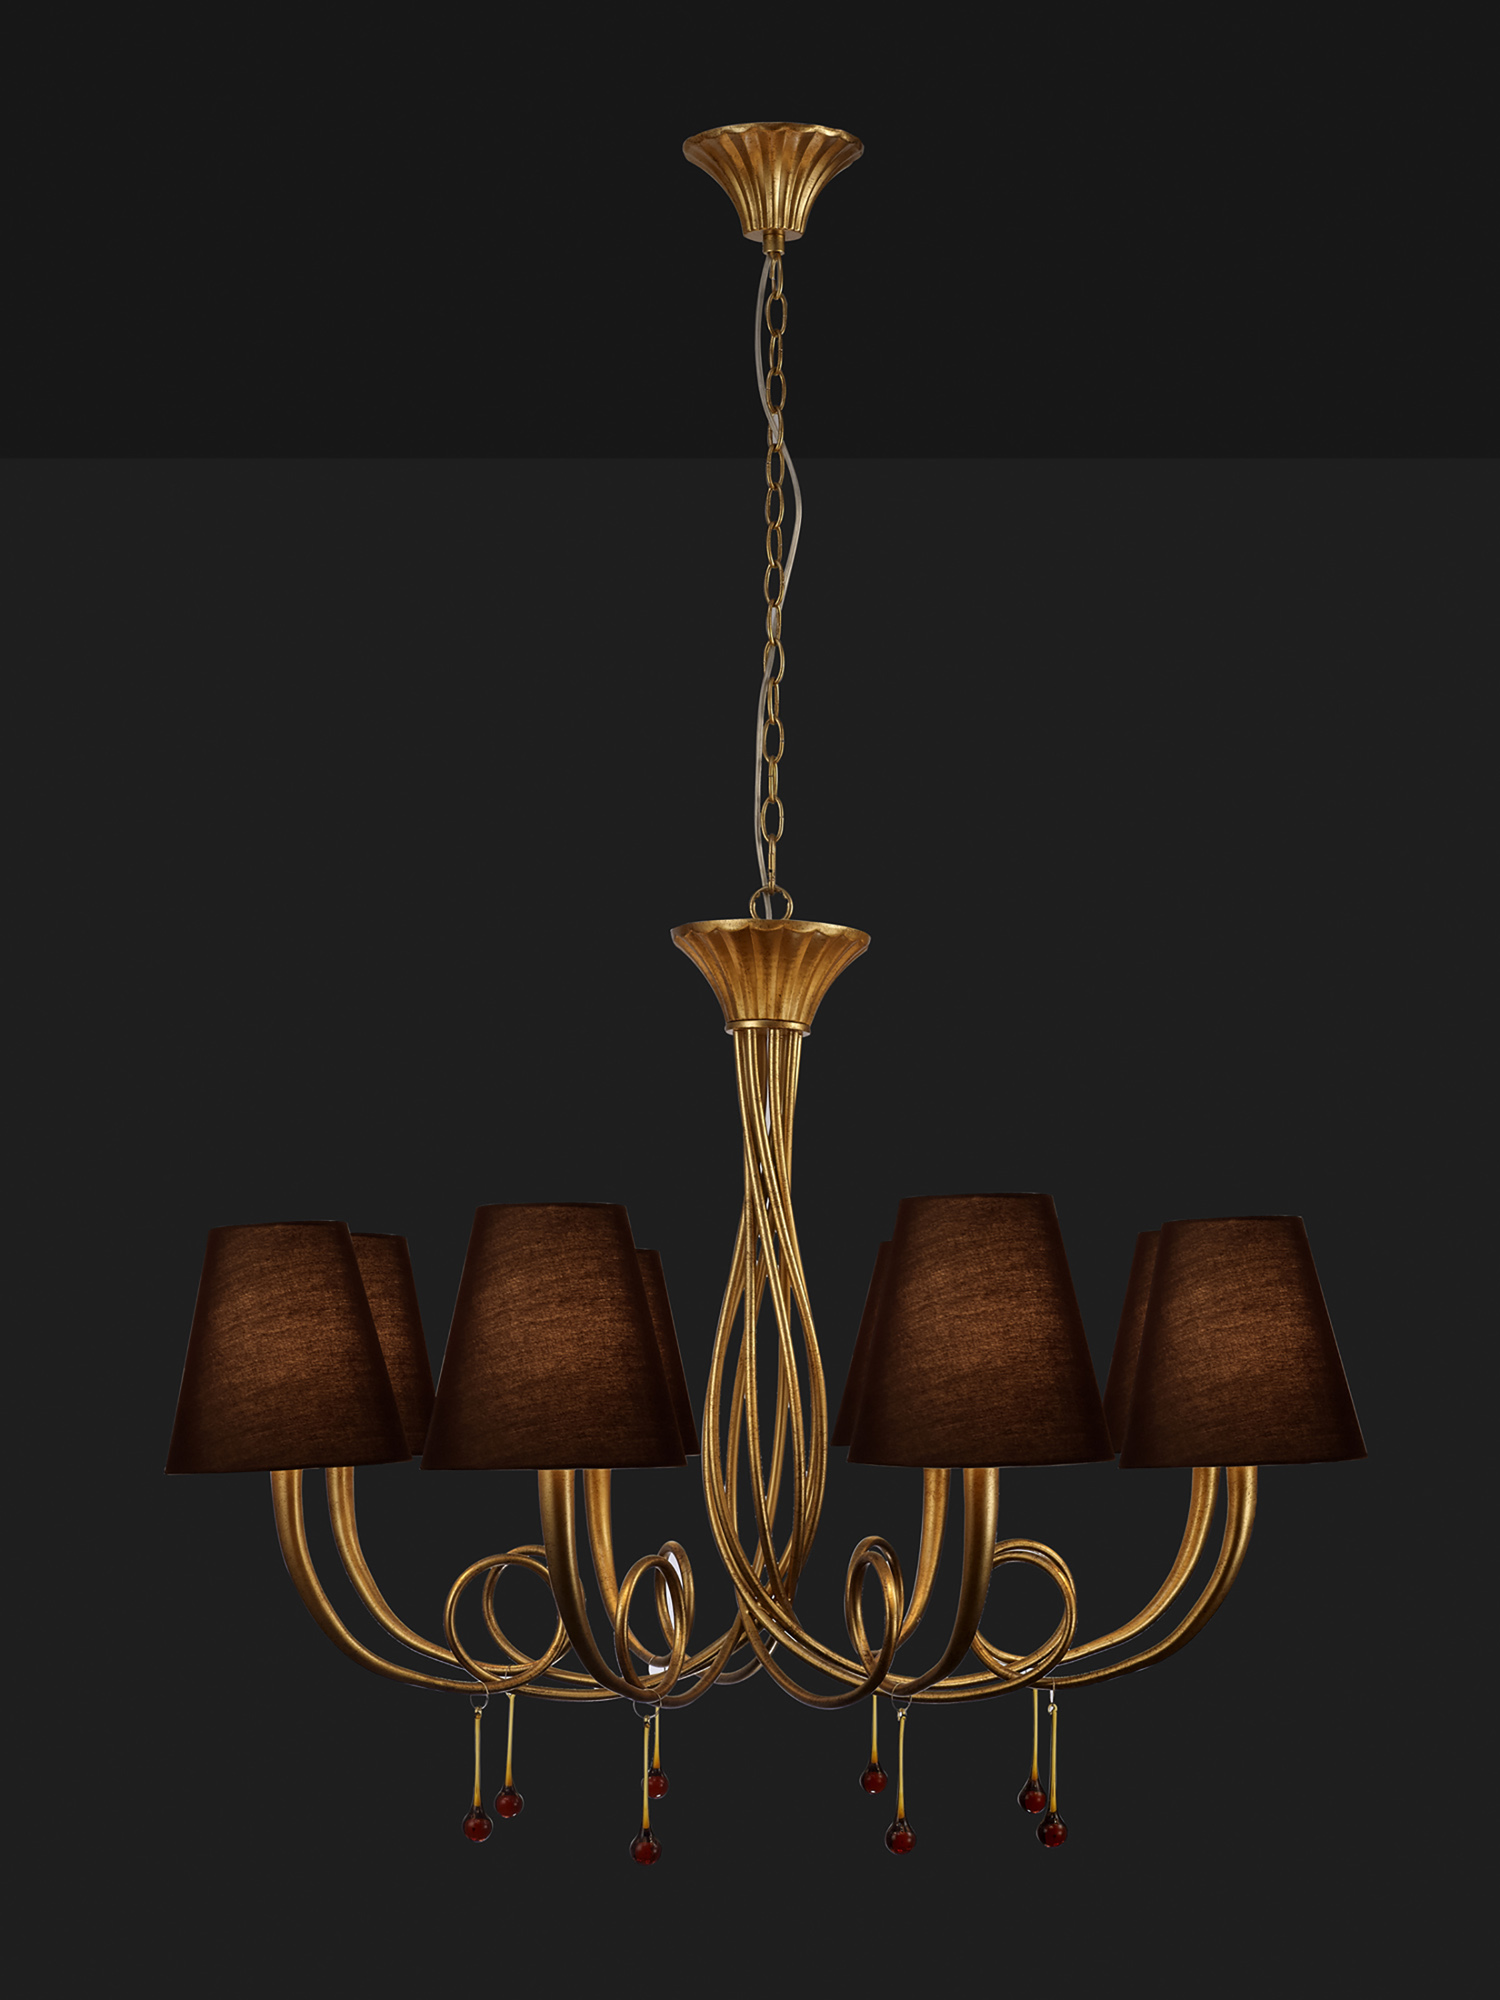 Paola Gold-Black Ceiling Lights Mantra Multi Arm Fittings